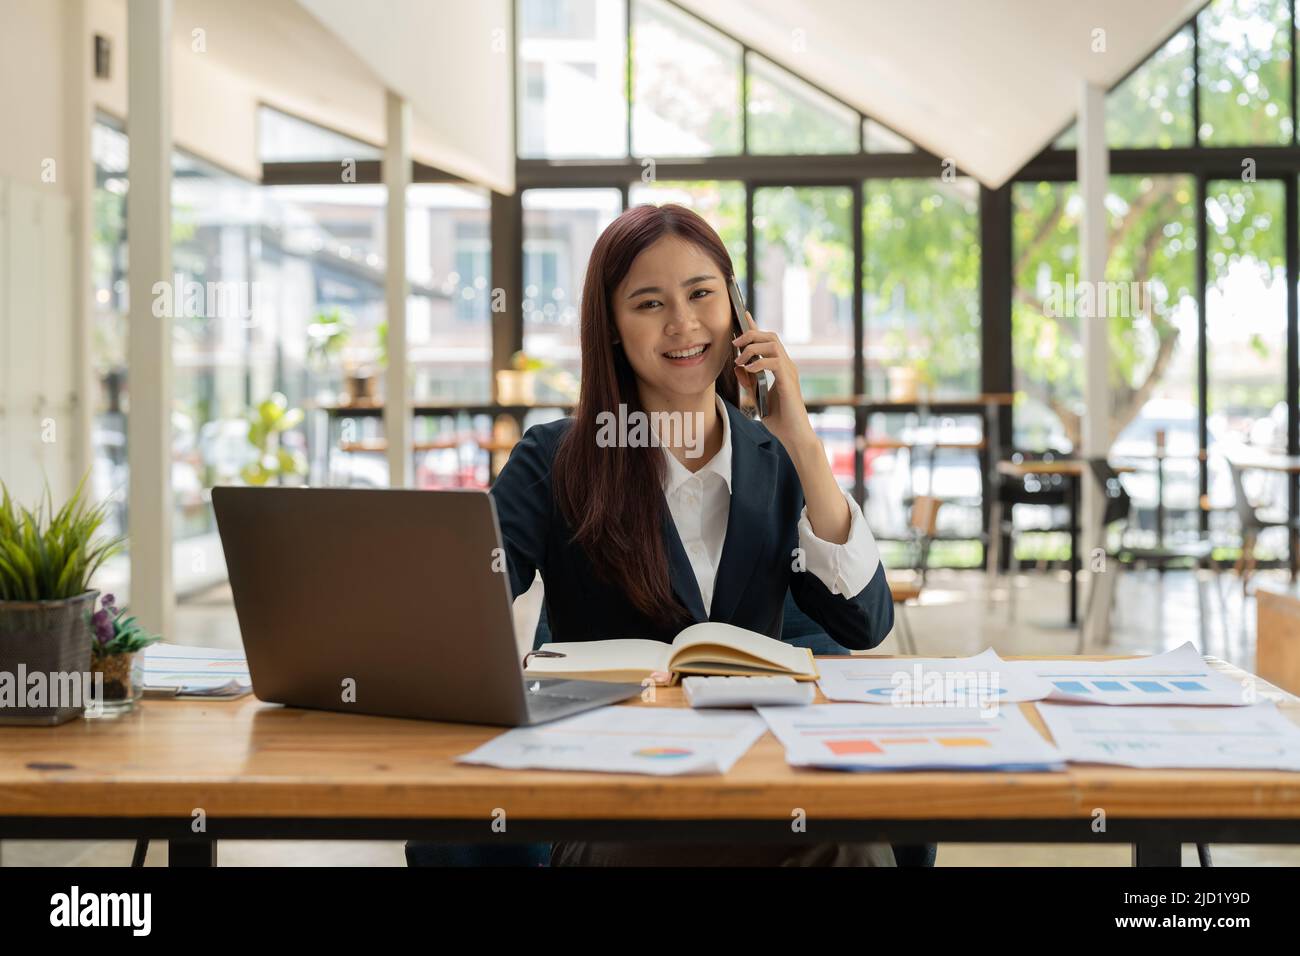 Smiling business asian woman in black suit talking on phone Stock Photo